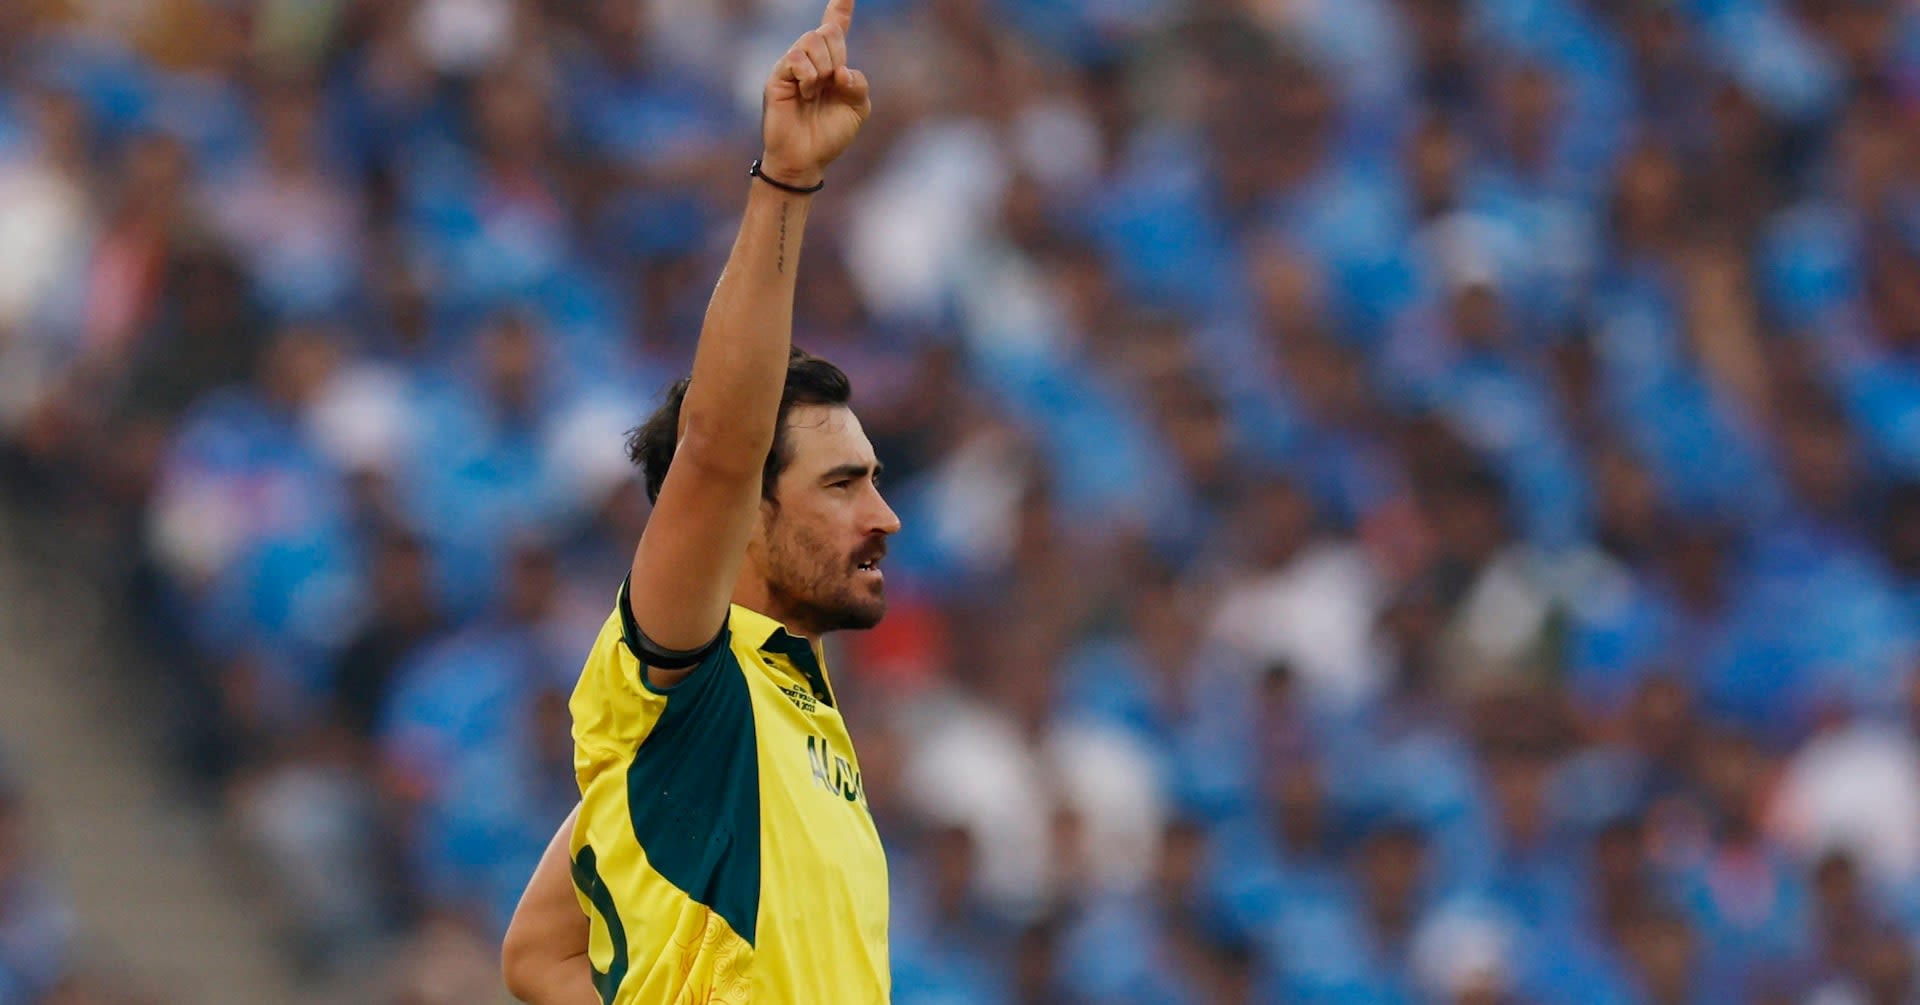 Australia's Starc justifies price tag in warning shot before World Cup